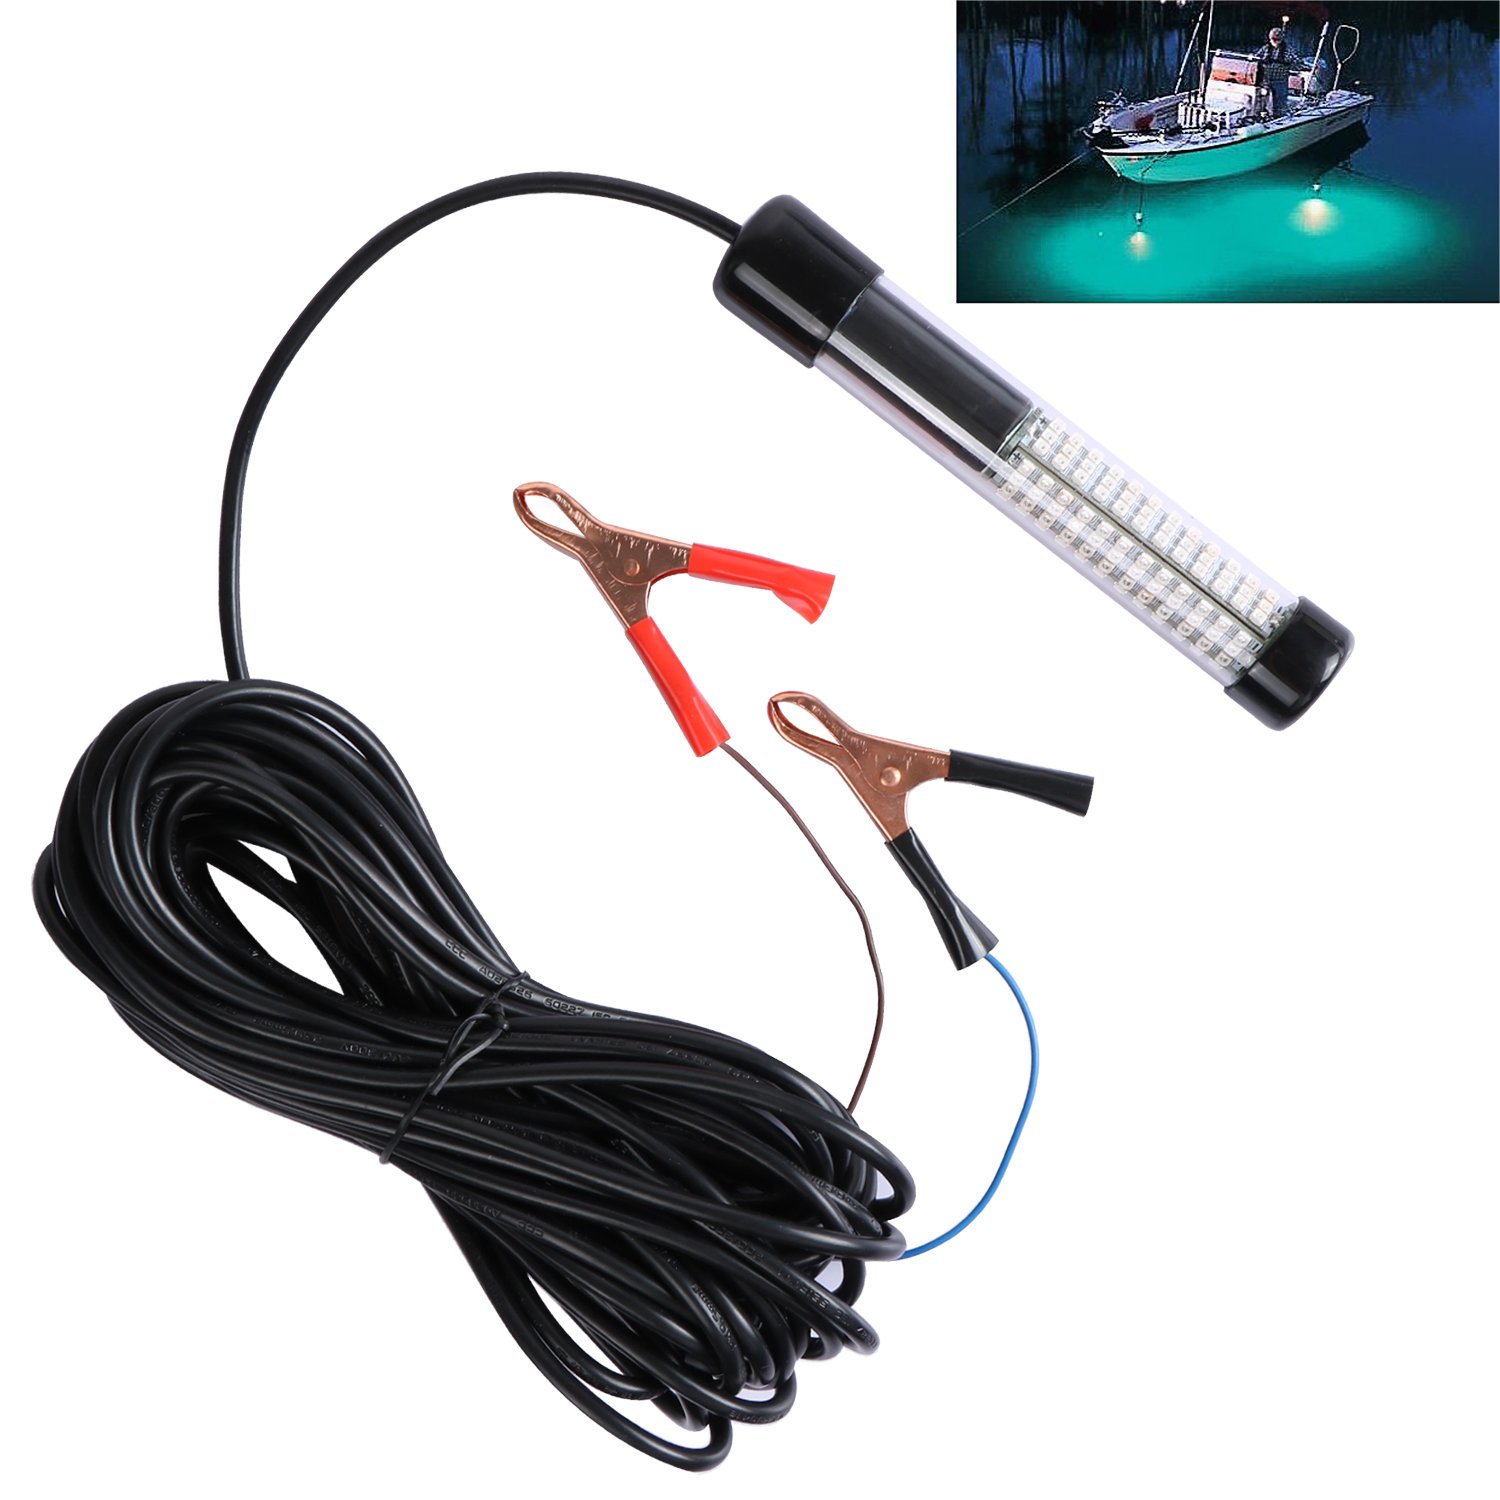 Goture Fishing Light Underwater, 12V 10.8W White Blue Green LED Submersible Fishing  Light, Fish Finder Lamp Dock Night Fishing Light Boat Fish Attractants  Freshwater Saltwater with 5M/12M Cord Blue Light Black Cap